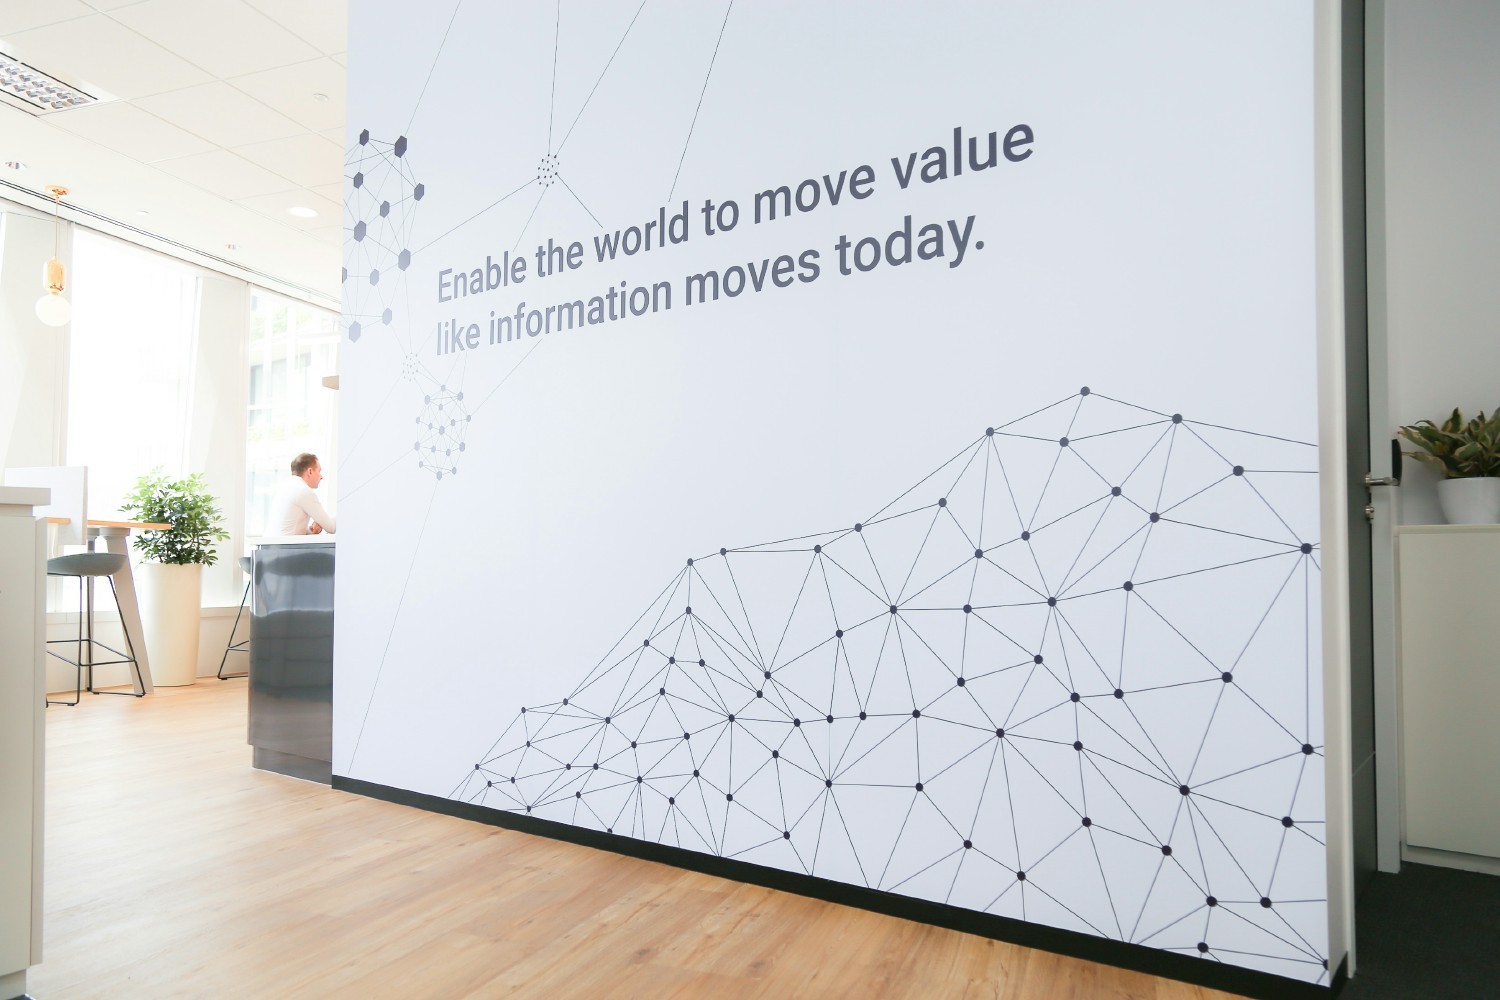 Our global offices remind us of our vision, and what we're all here for: building the Internet of Value.